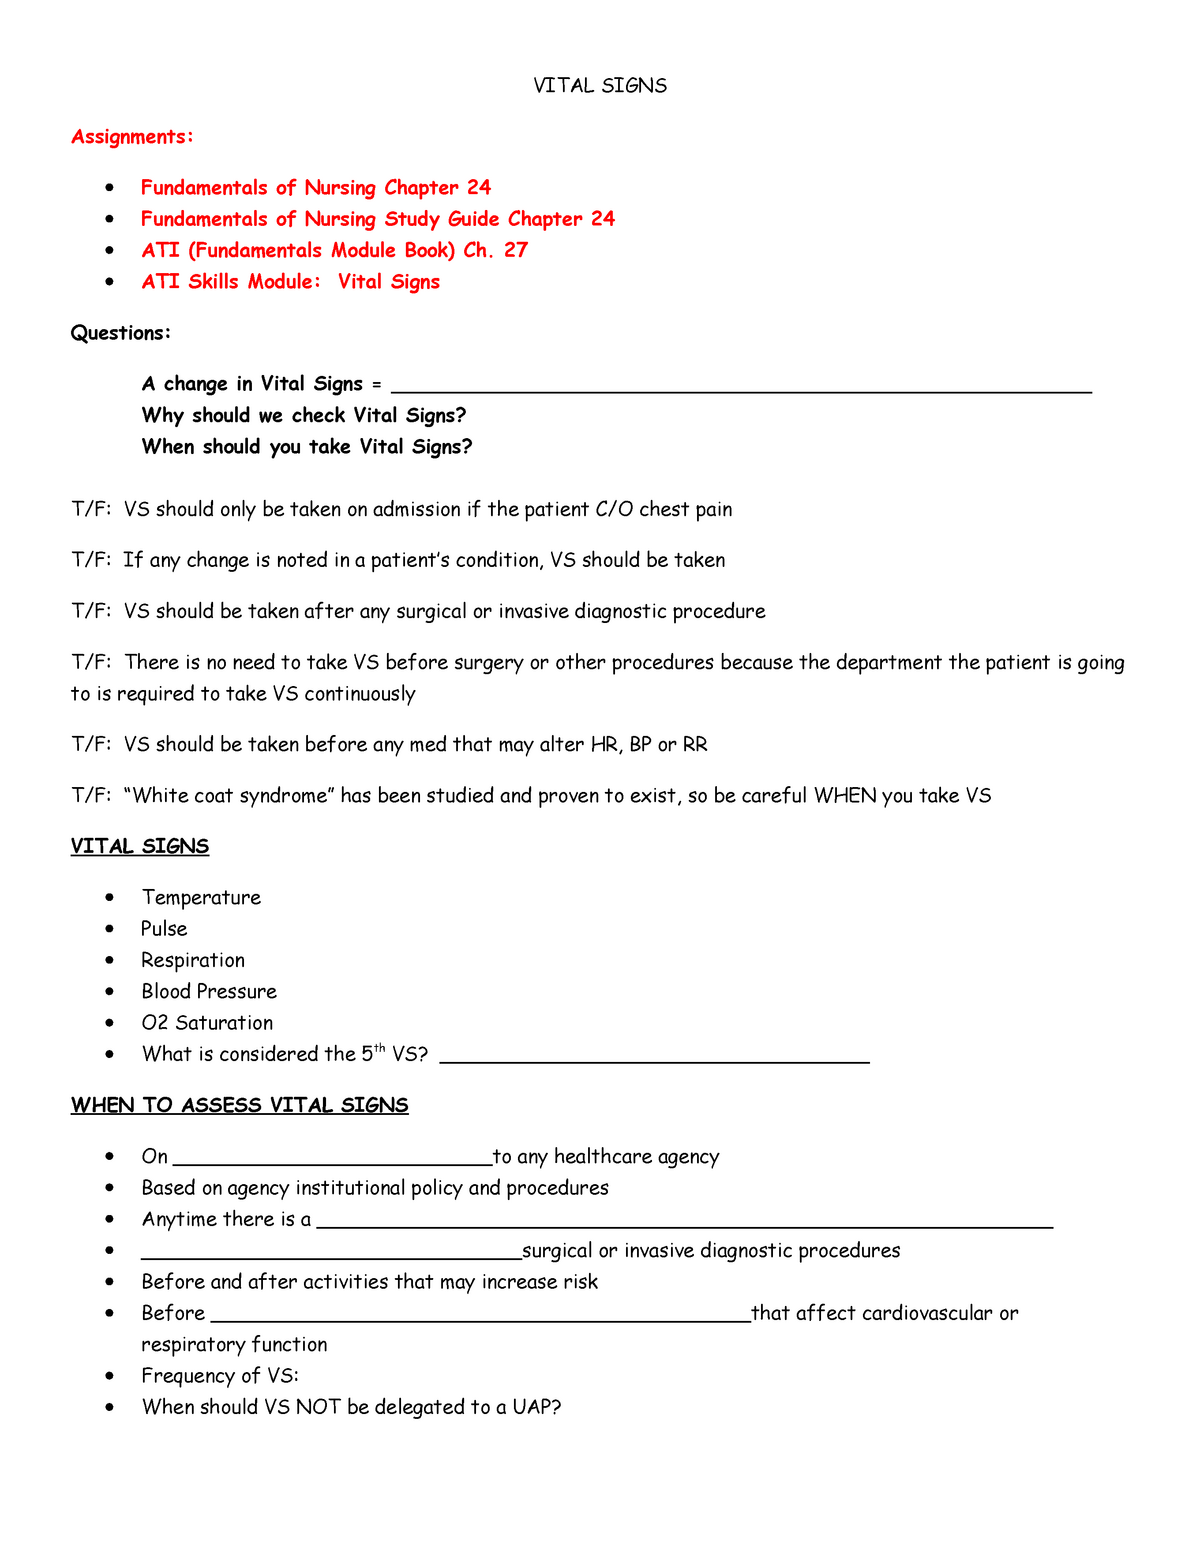 assignment on vital signs pdf